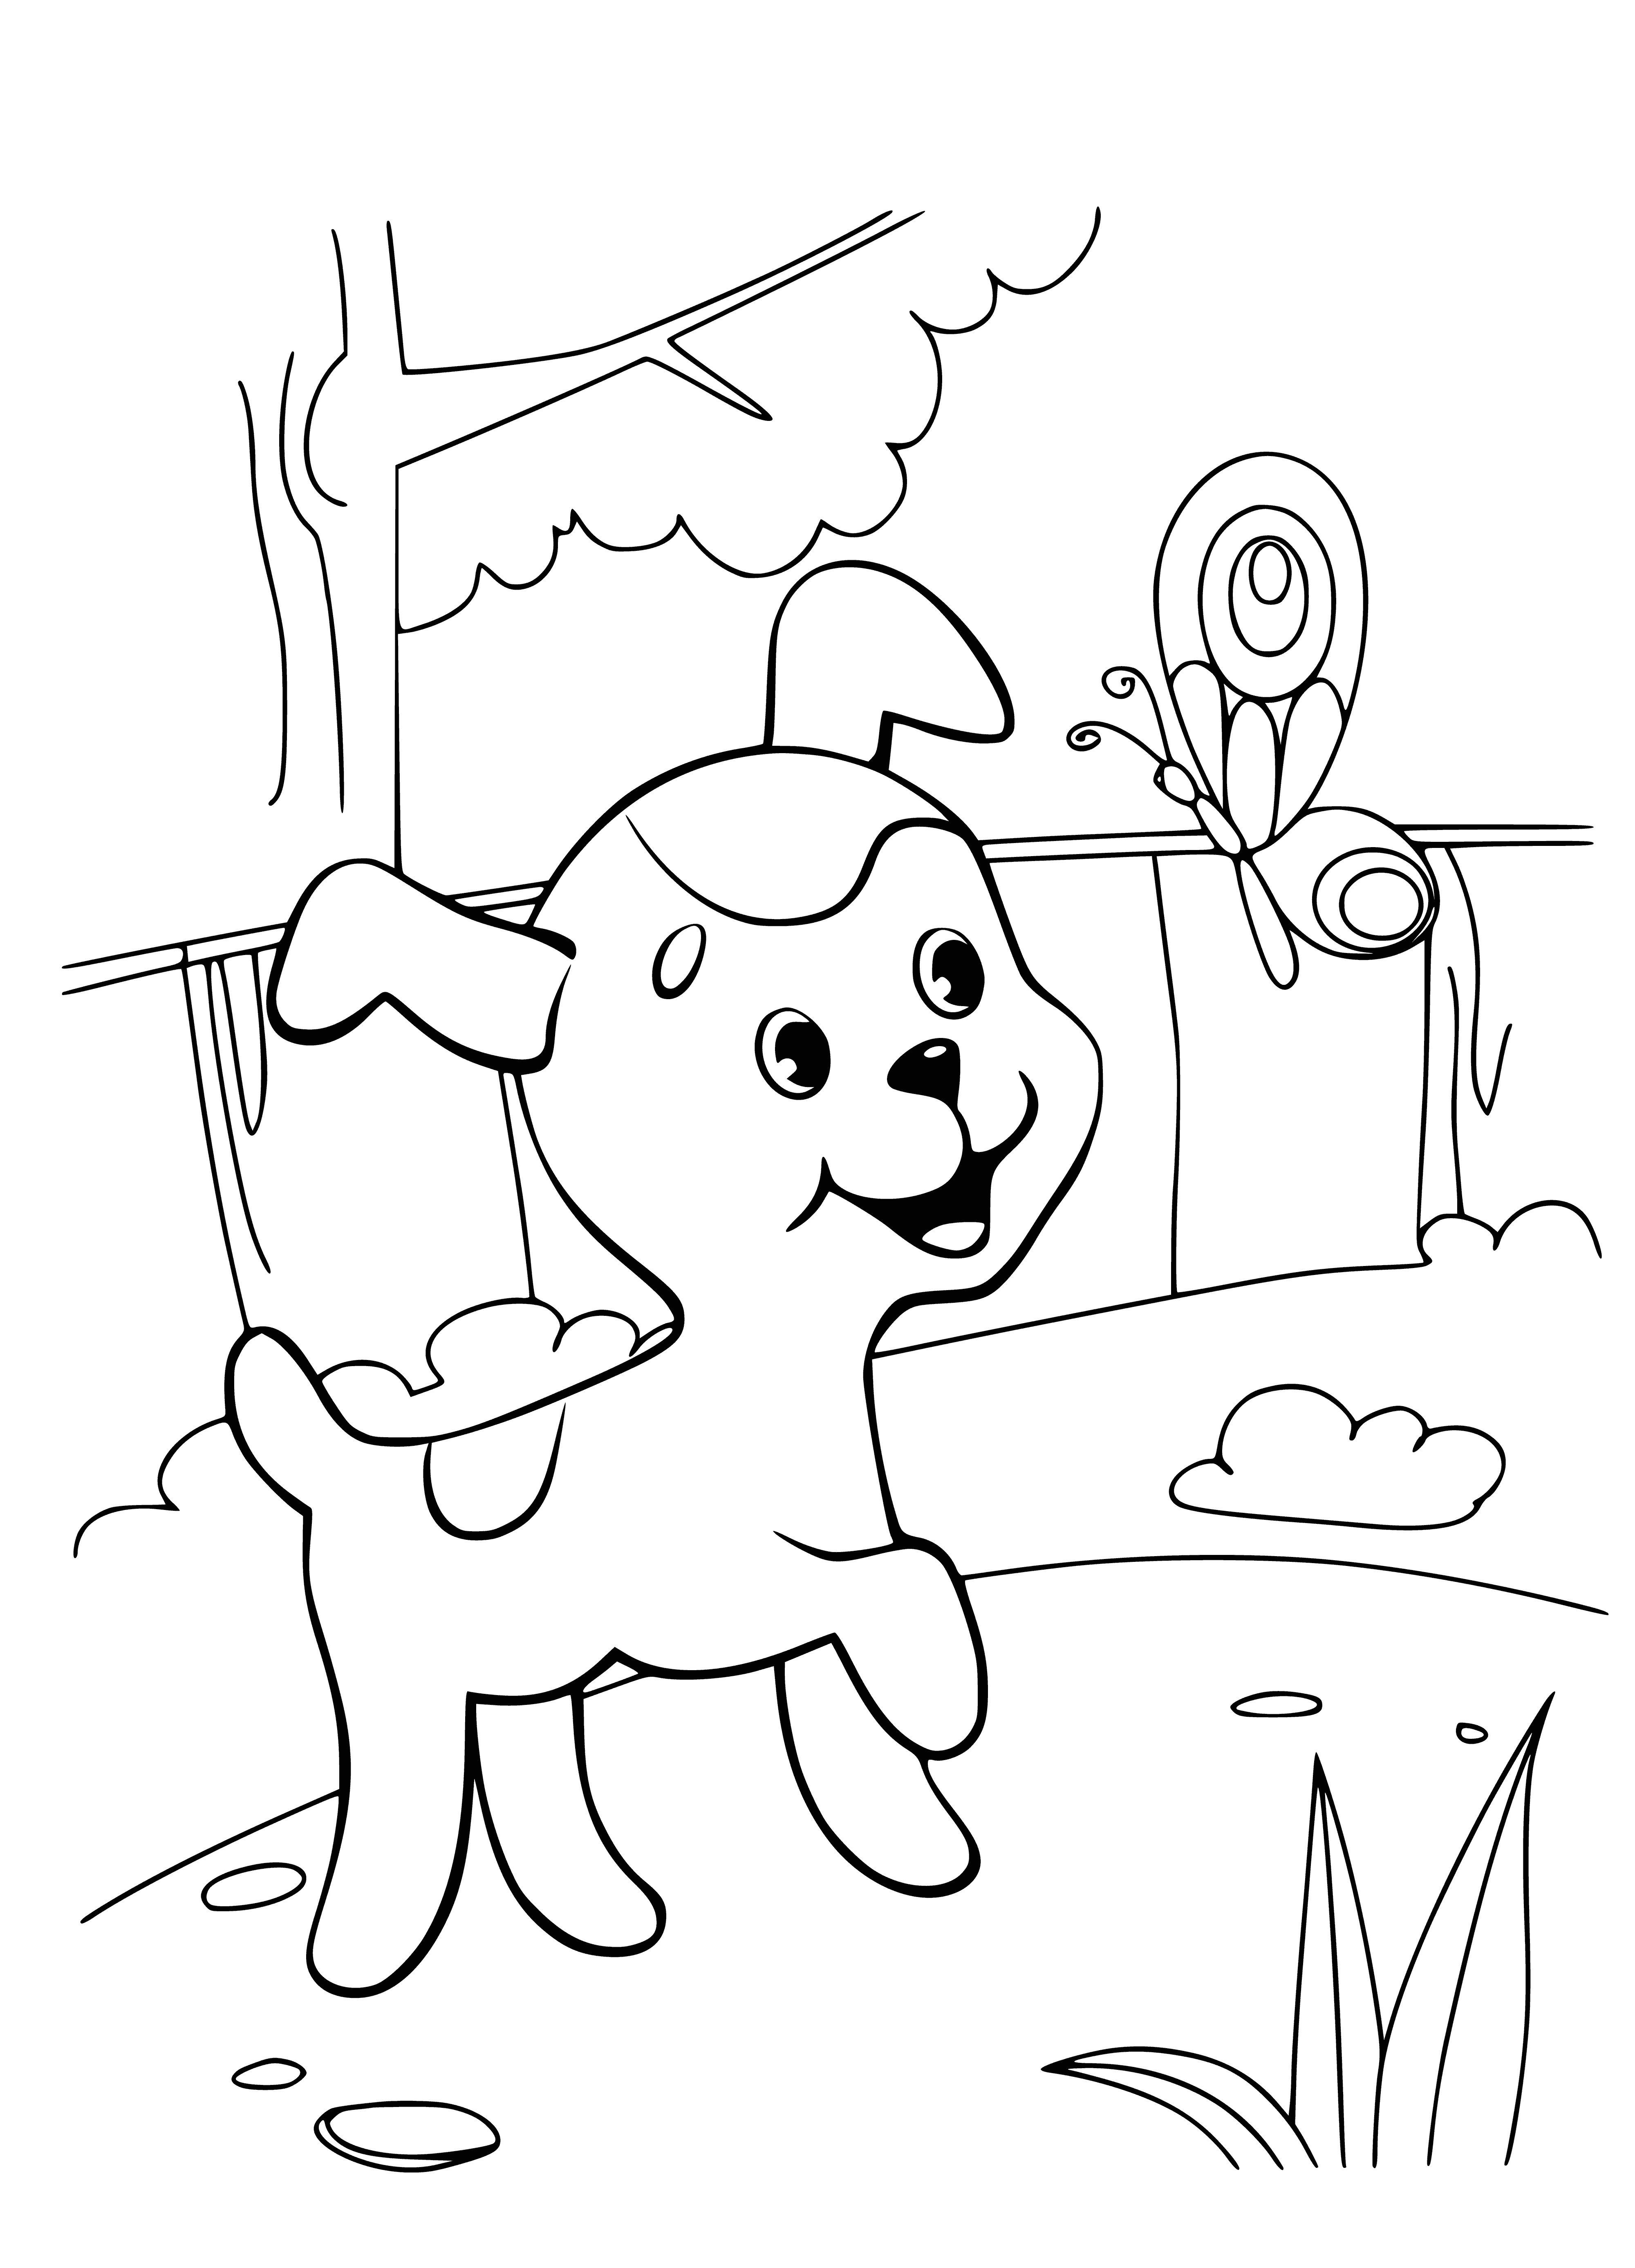 coloring page: Kitten and puppy play, kitten batting red ball that puppy chases.